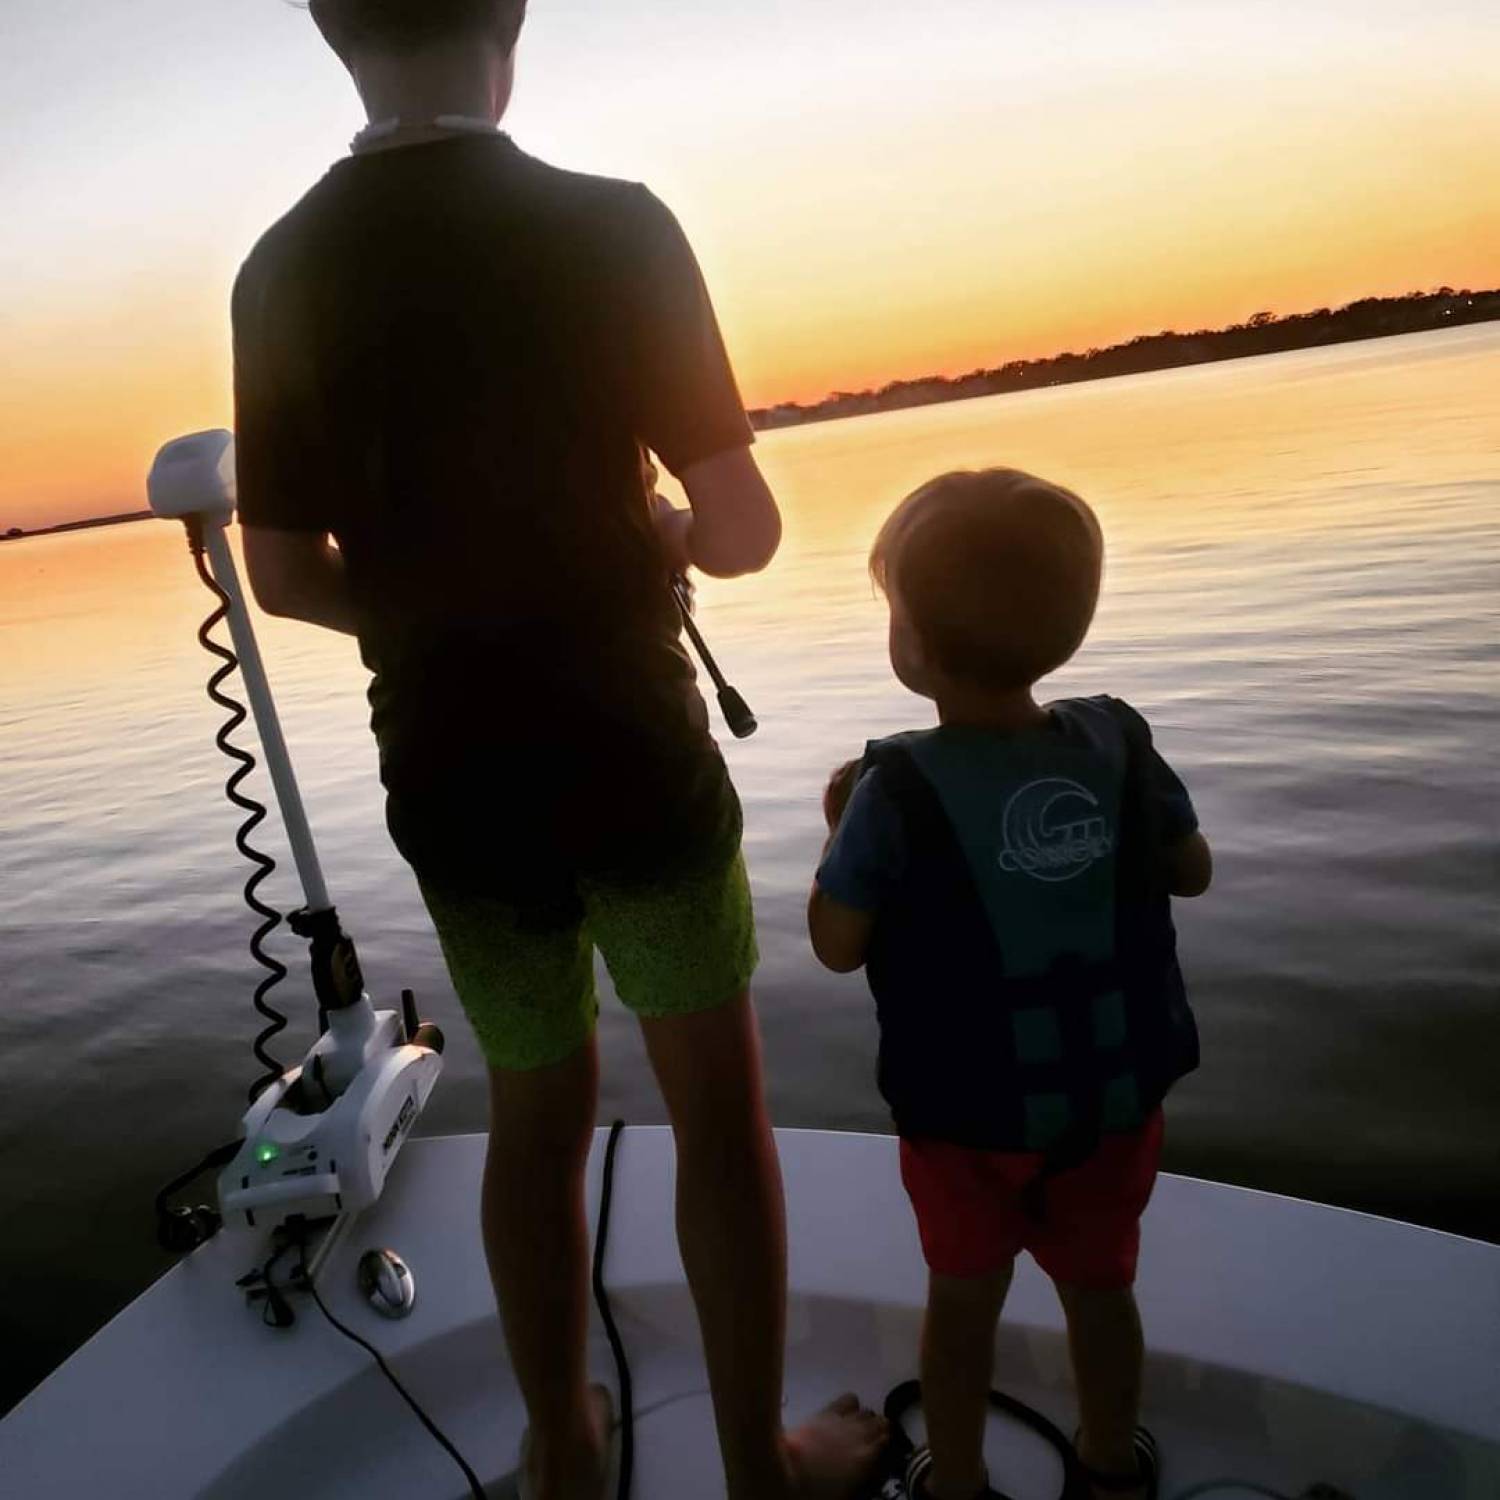 Title: My Brothers Keeper - On board their Sportsman Masters 227 Bay Boat - Location: Gulf shores Al.. Participating in the Photo Contest #SportsmanNovember